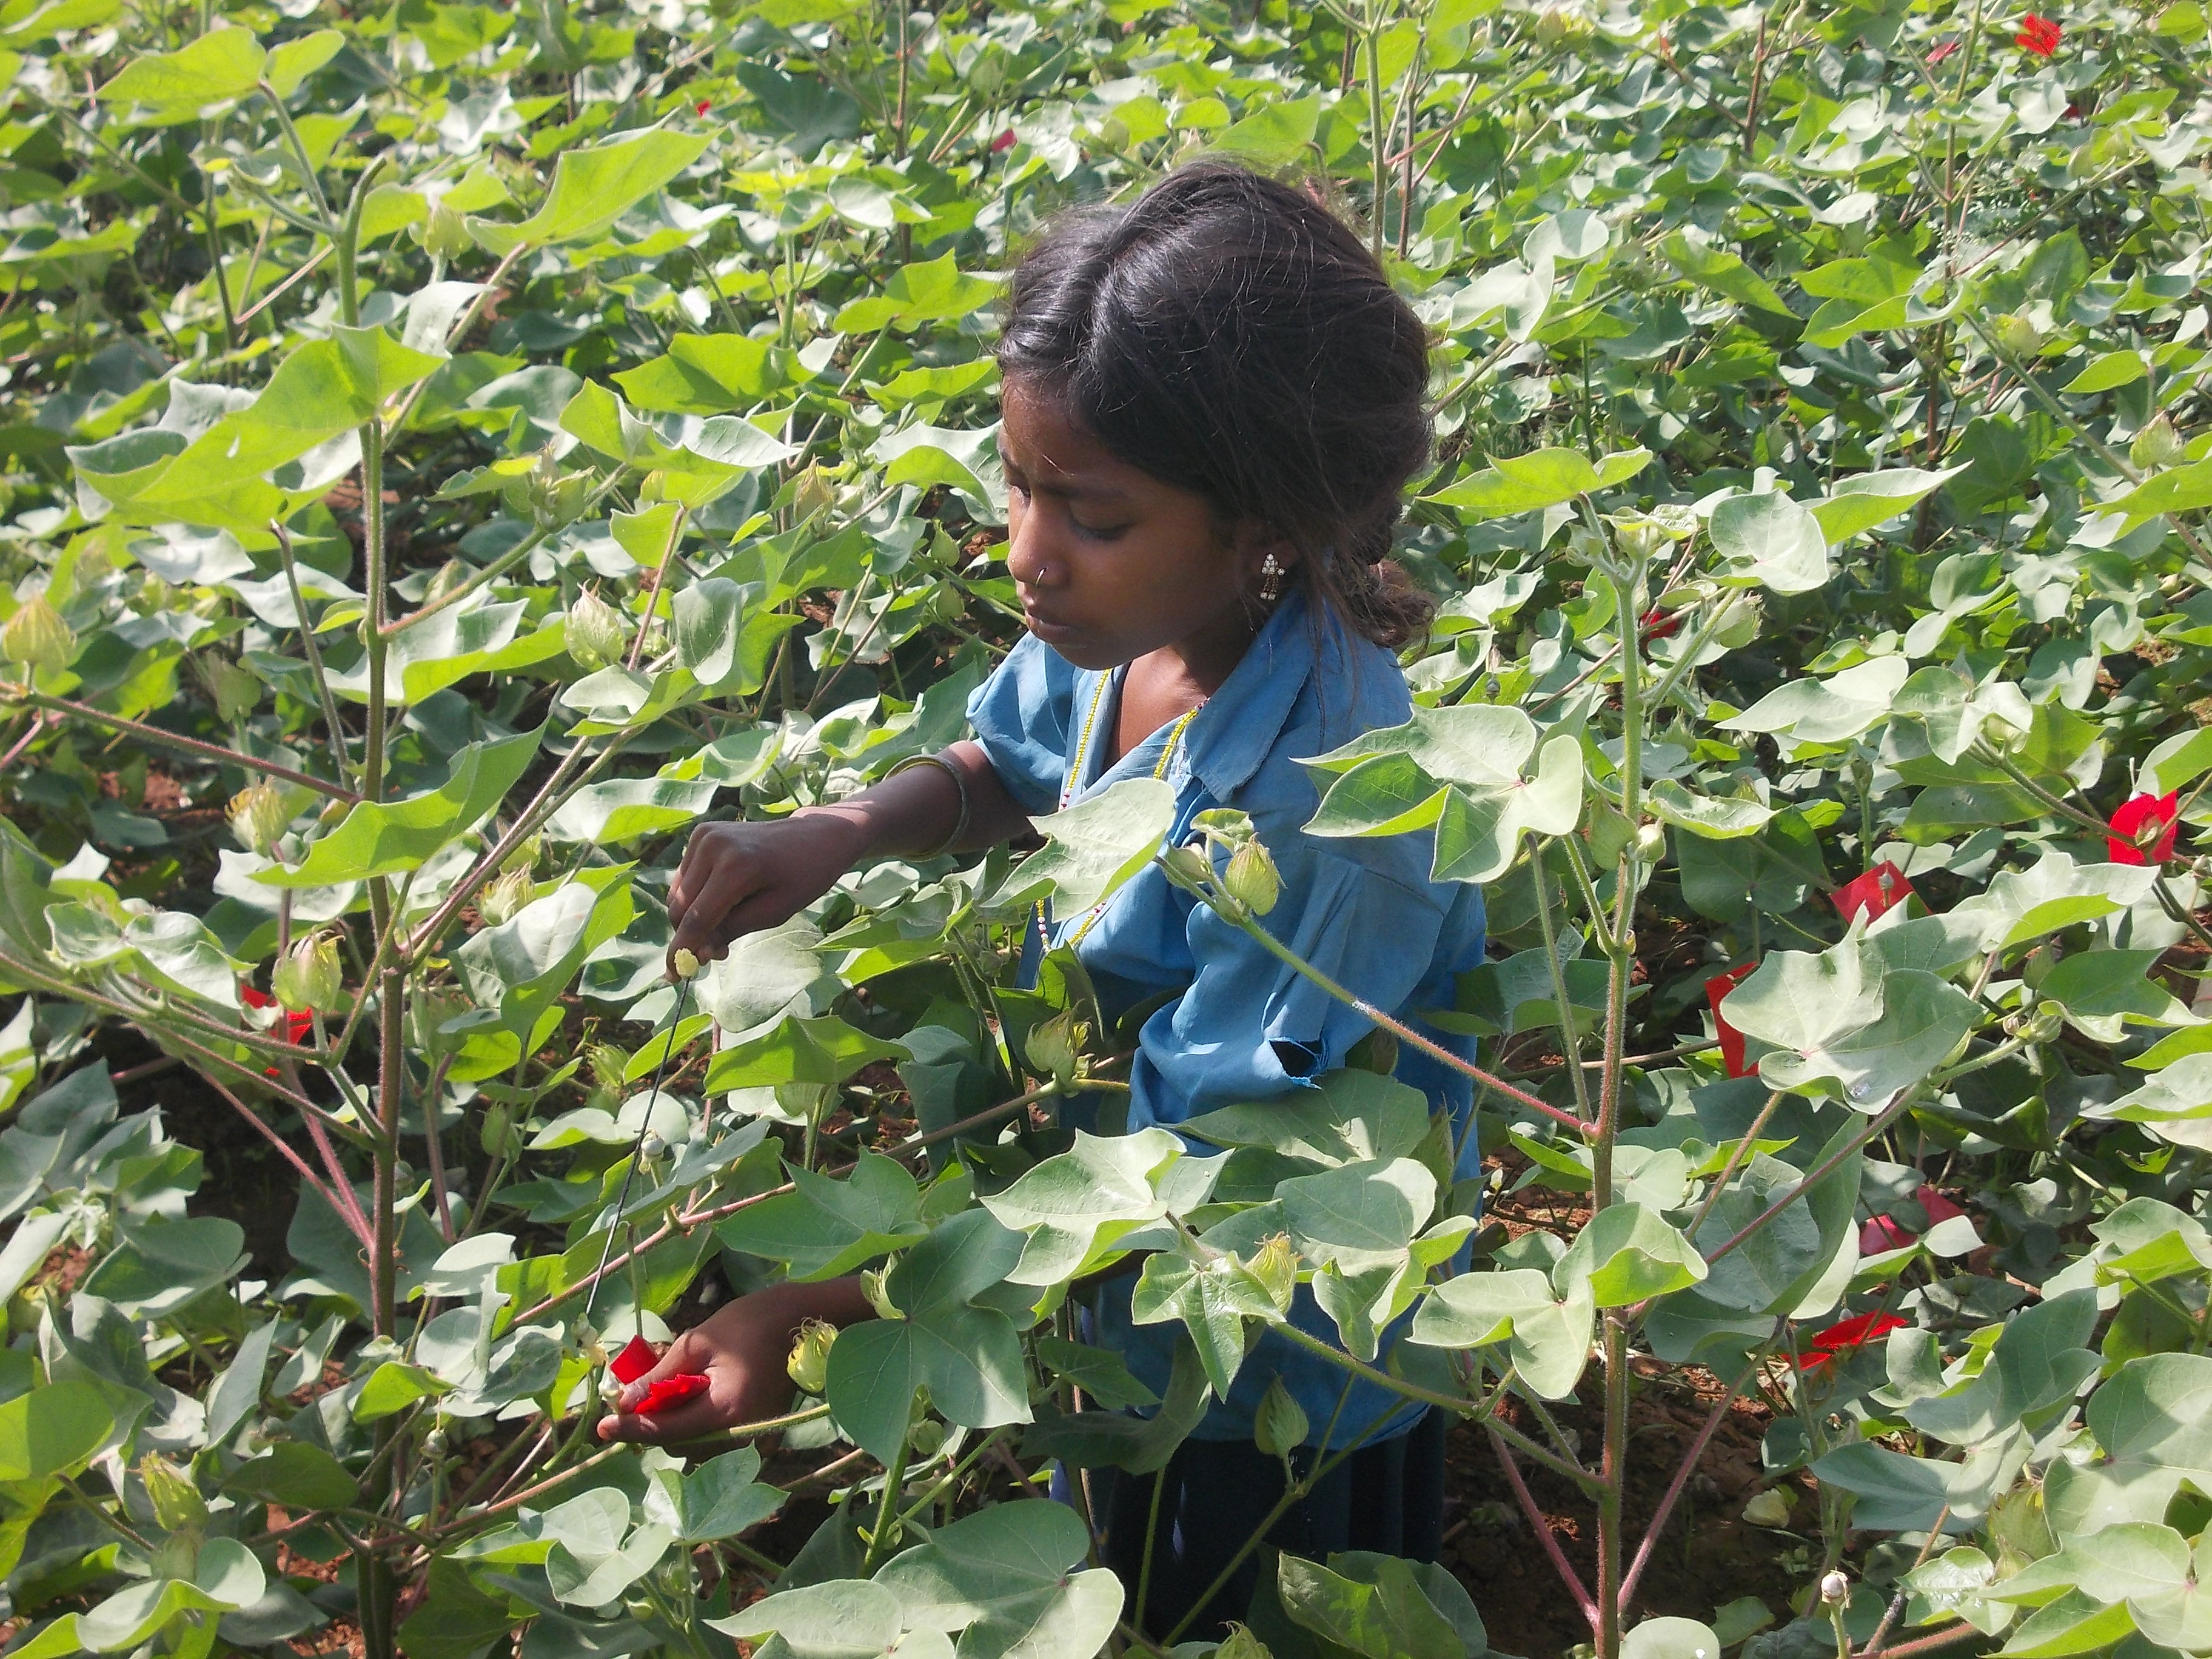 Almost half a million Indian children produce cottonseed